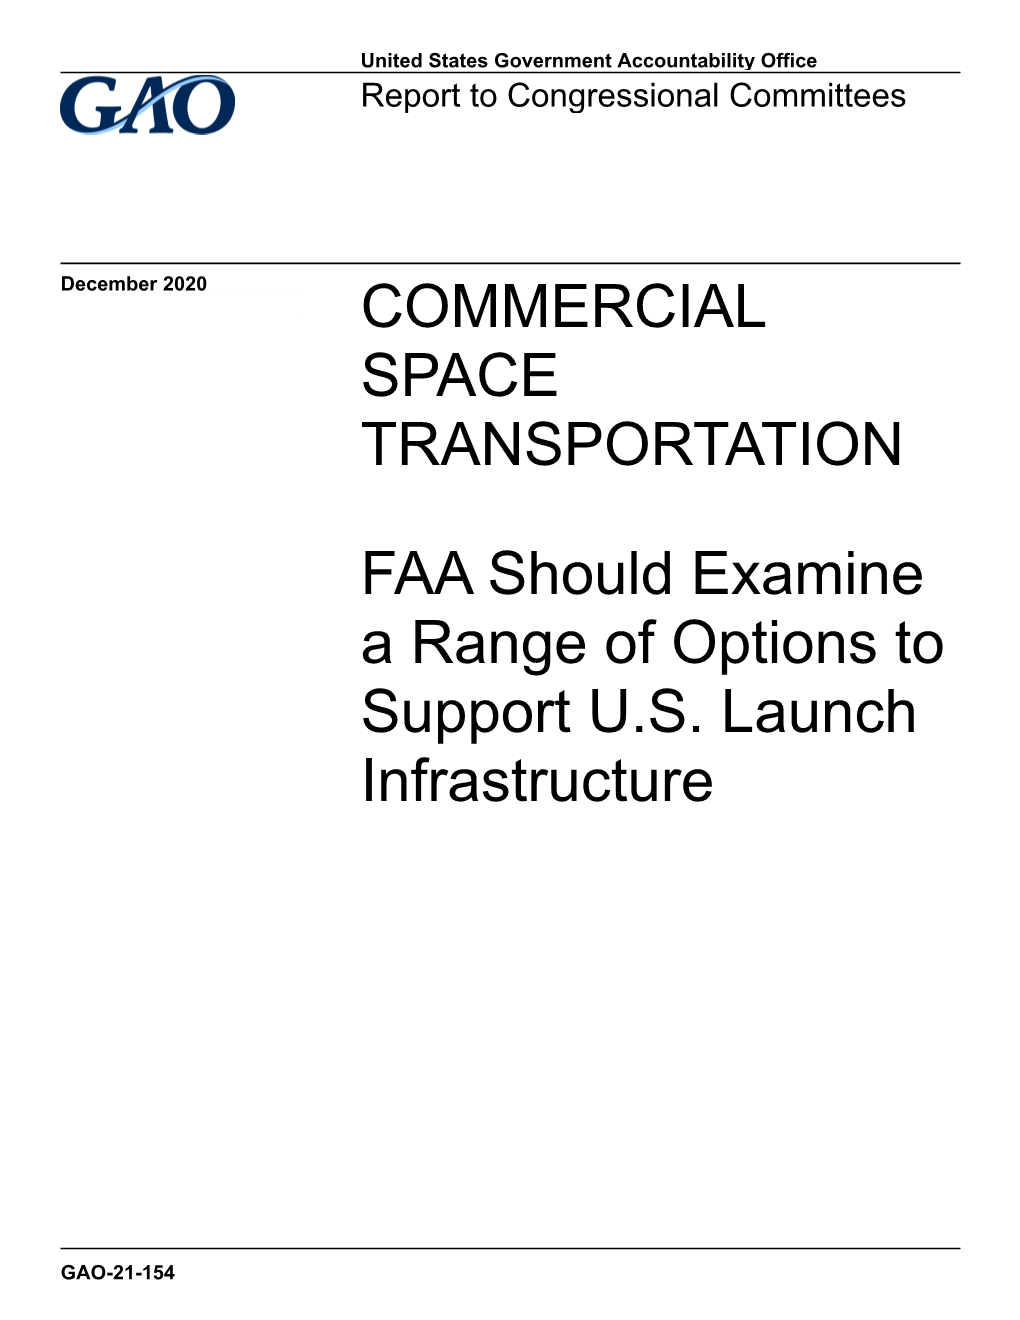 Gao-21-154, Commercial Space Transportation